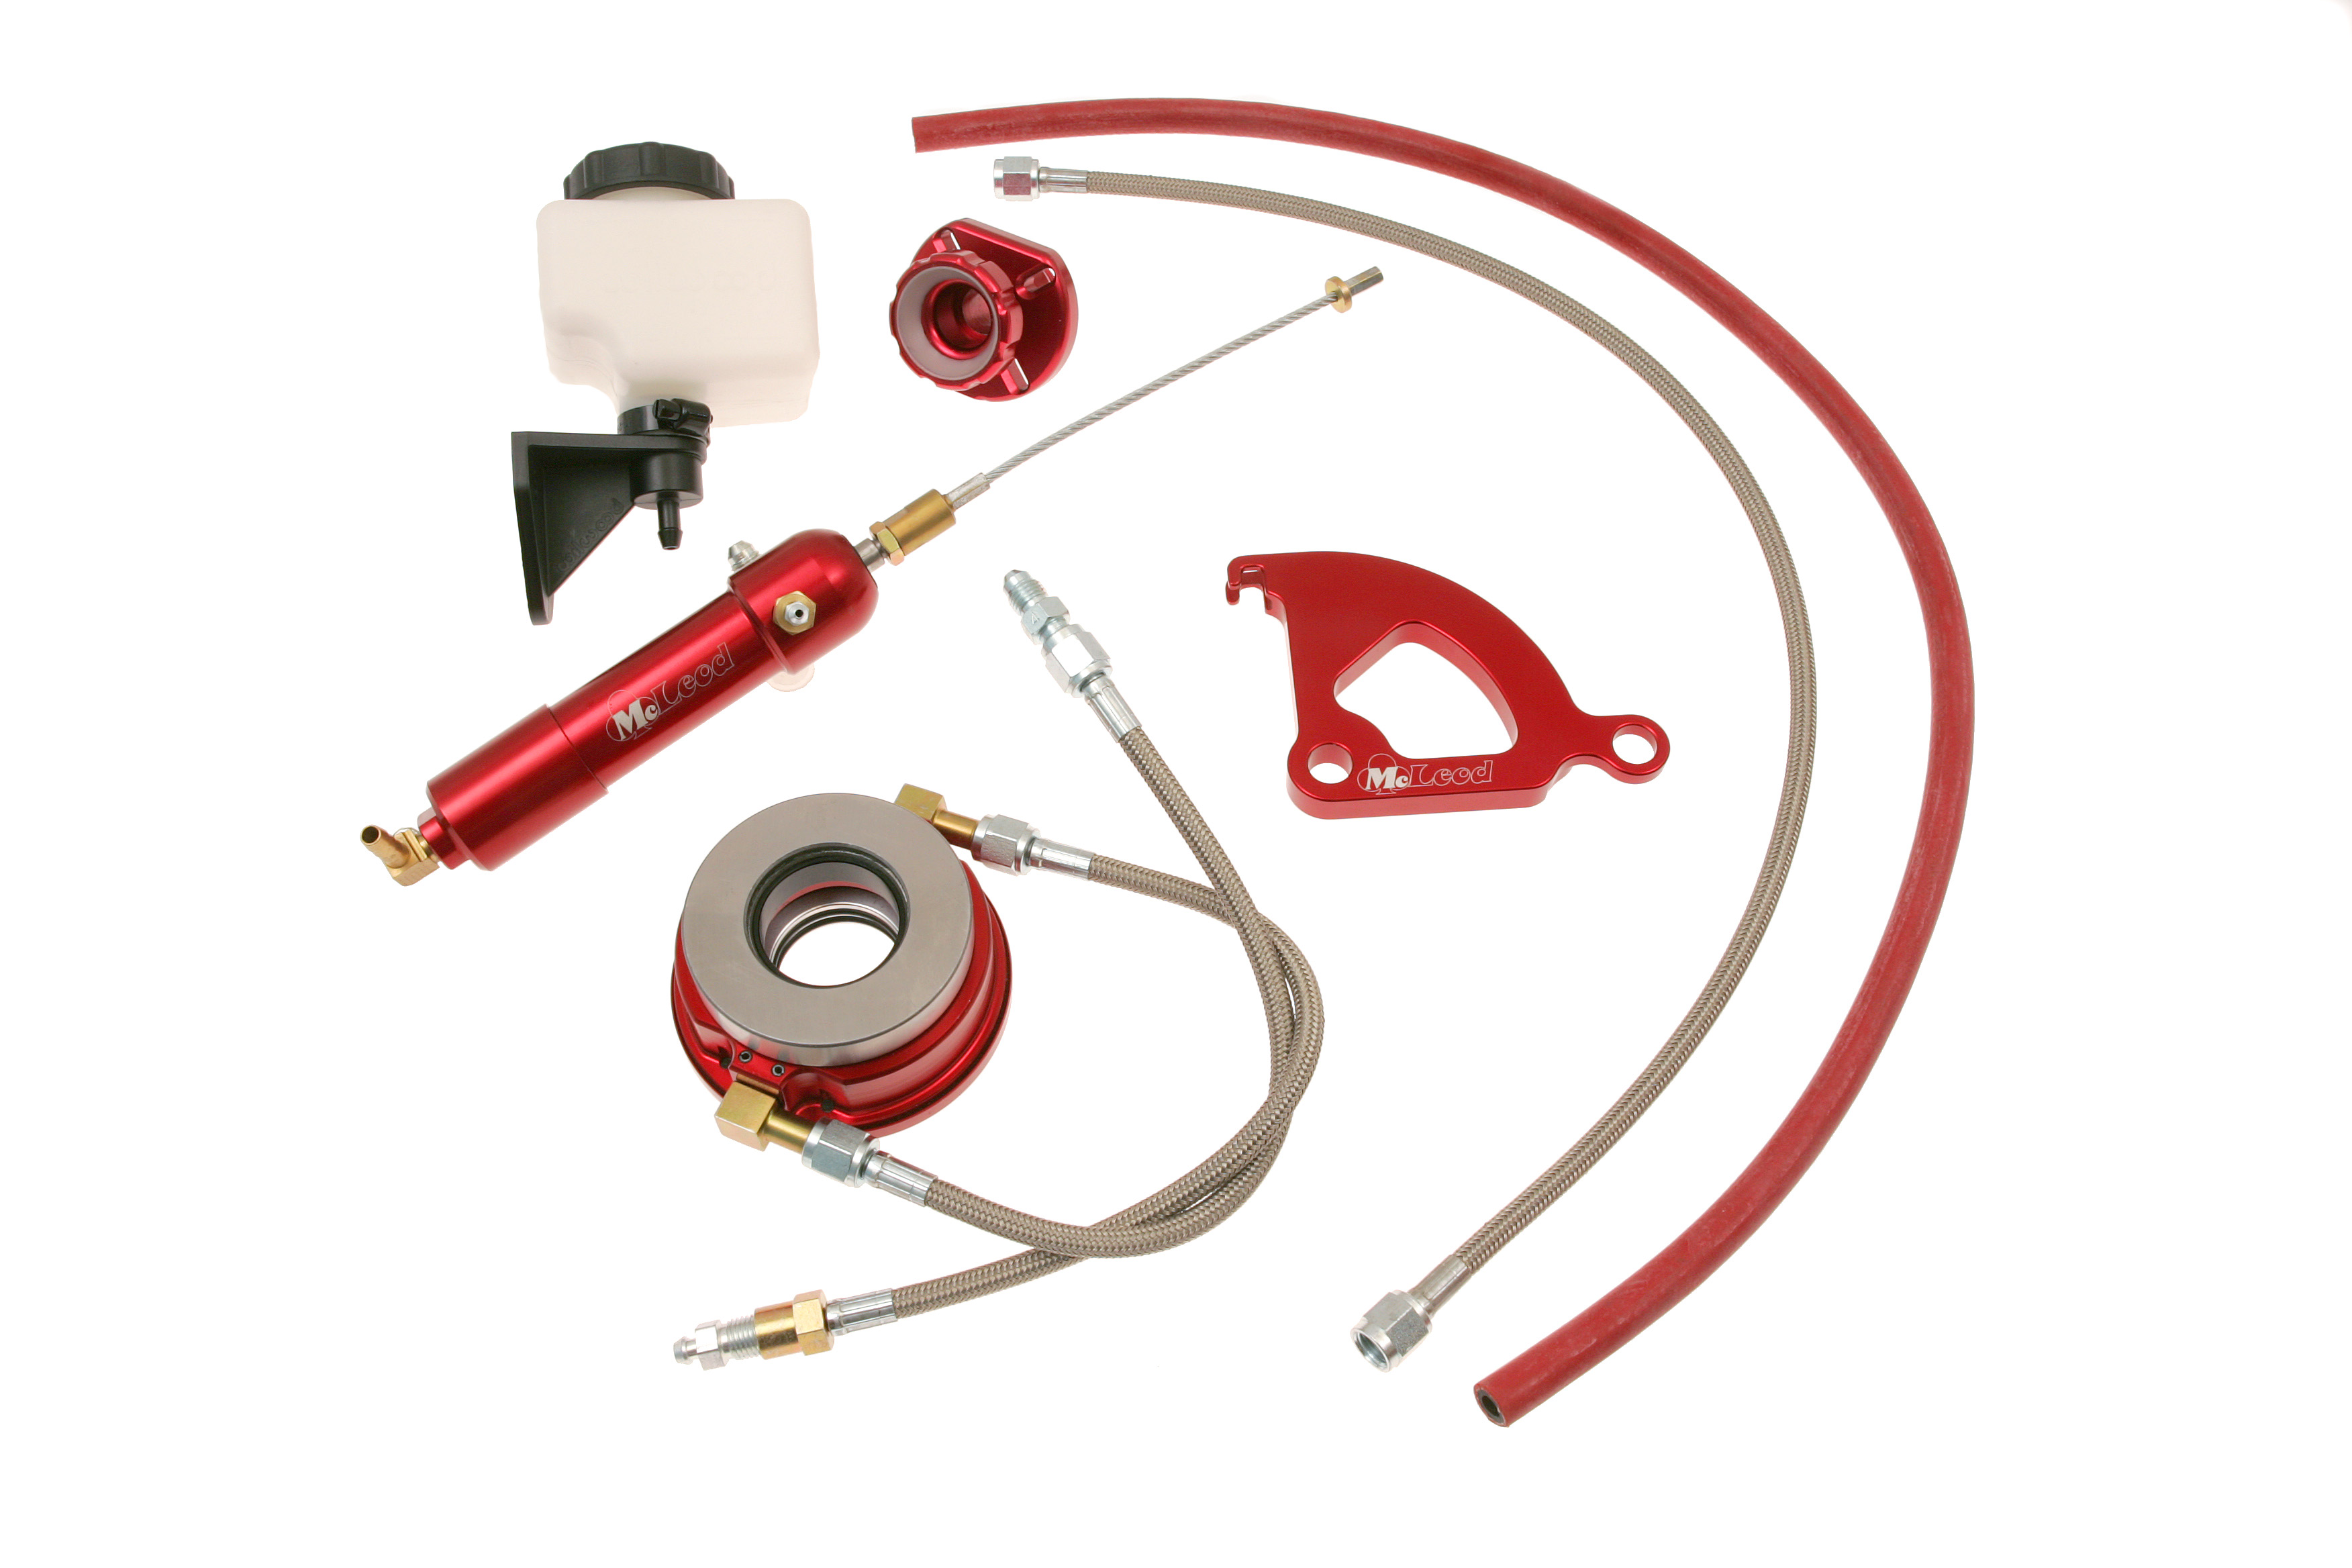 McLeod 14-325 Hydraulic T.O. Brg Kit for 79-04 Mustang